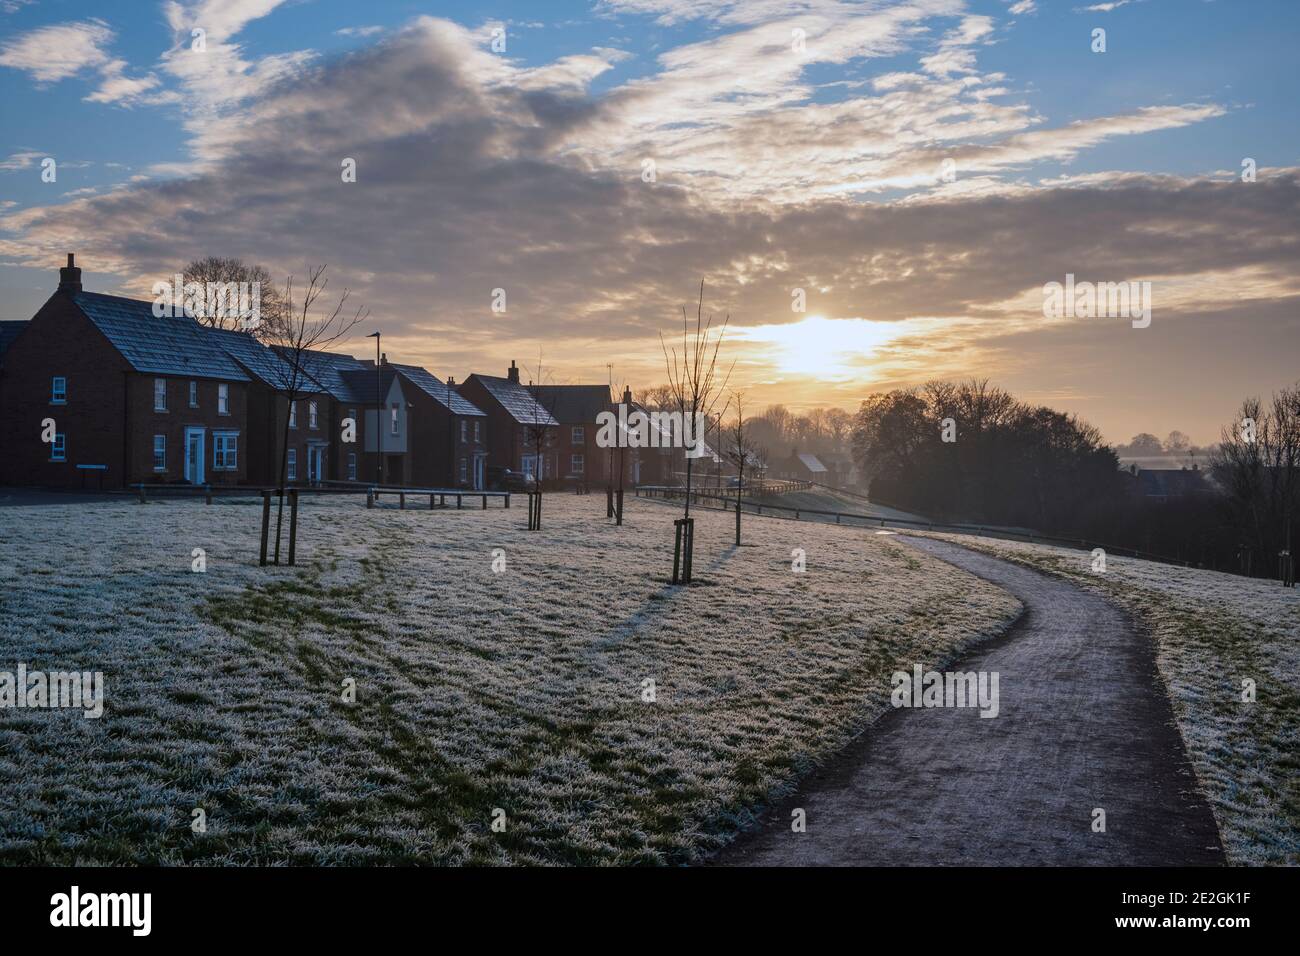 Sunset over a new housing development in Ashbourne, Derbyshire Stock Photo